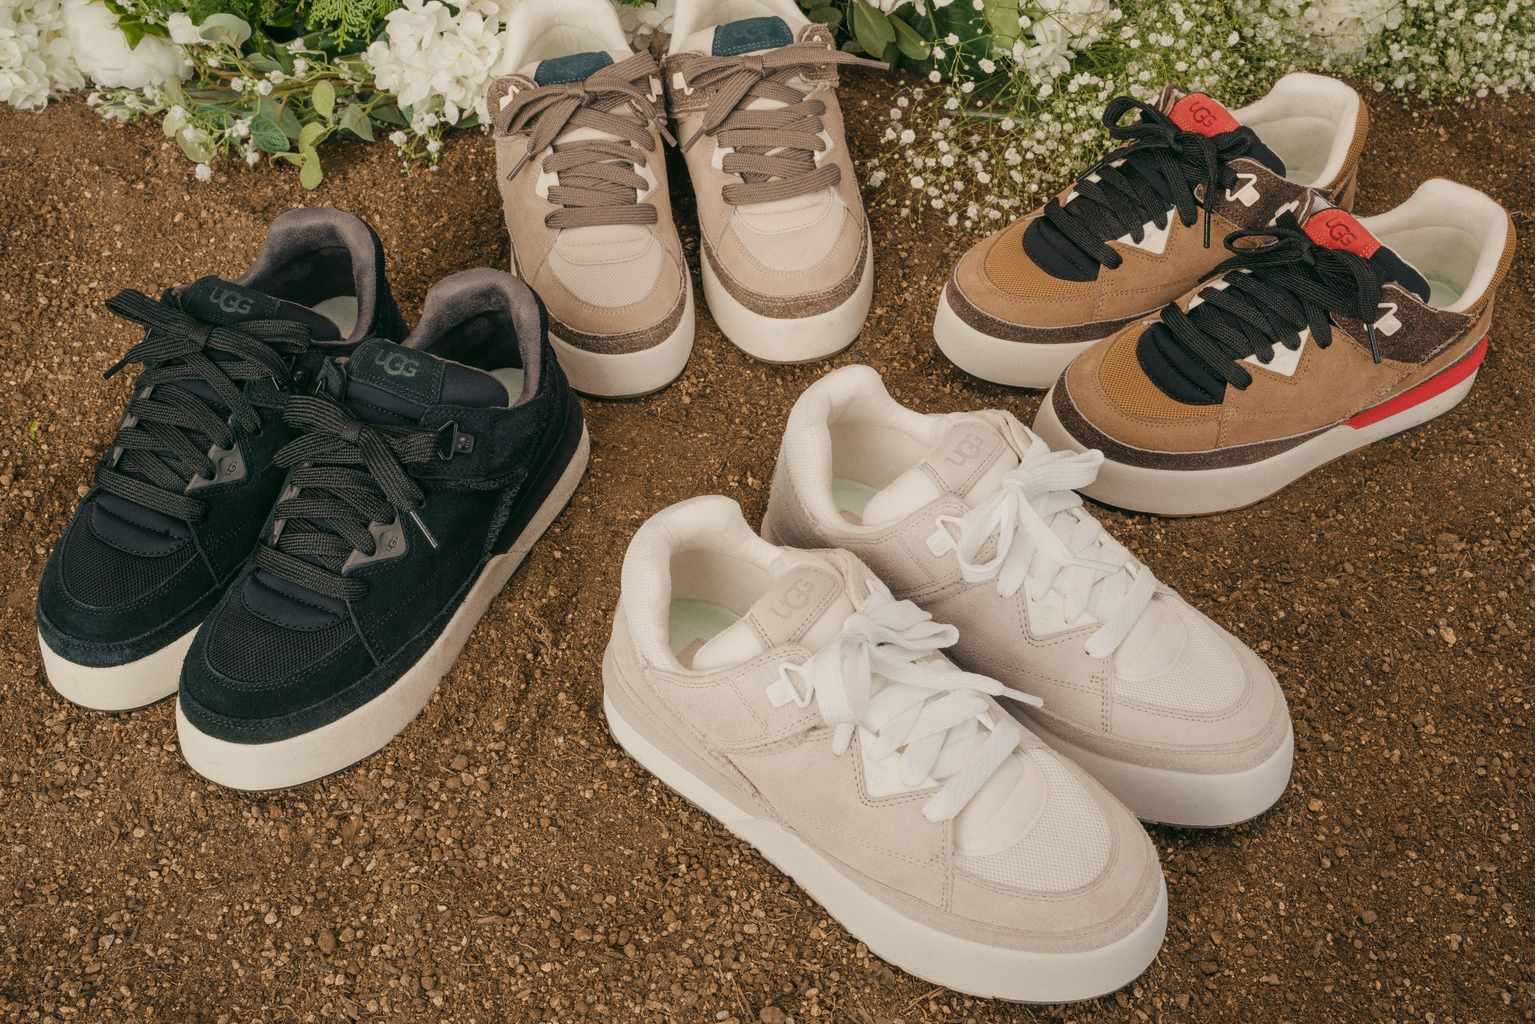 UGG's Goldencush sneaker collection in beige, brown, black, and white suede colorways